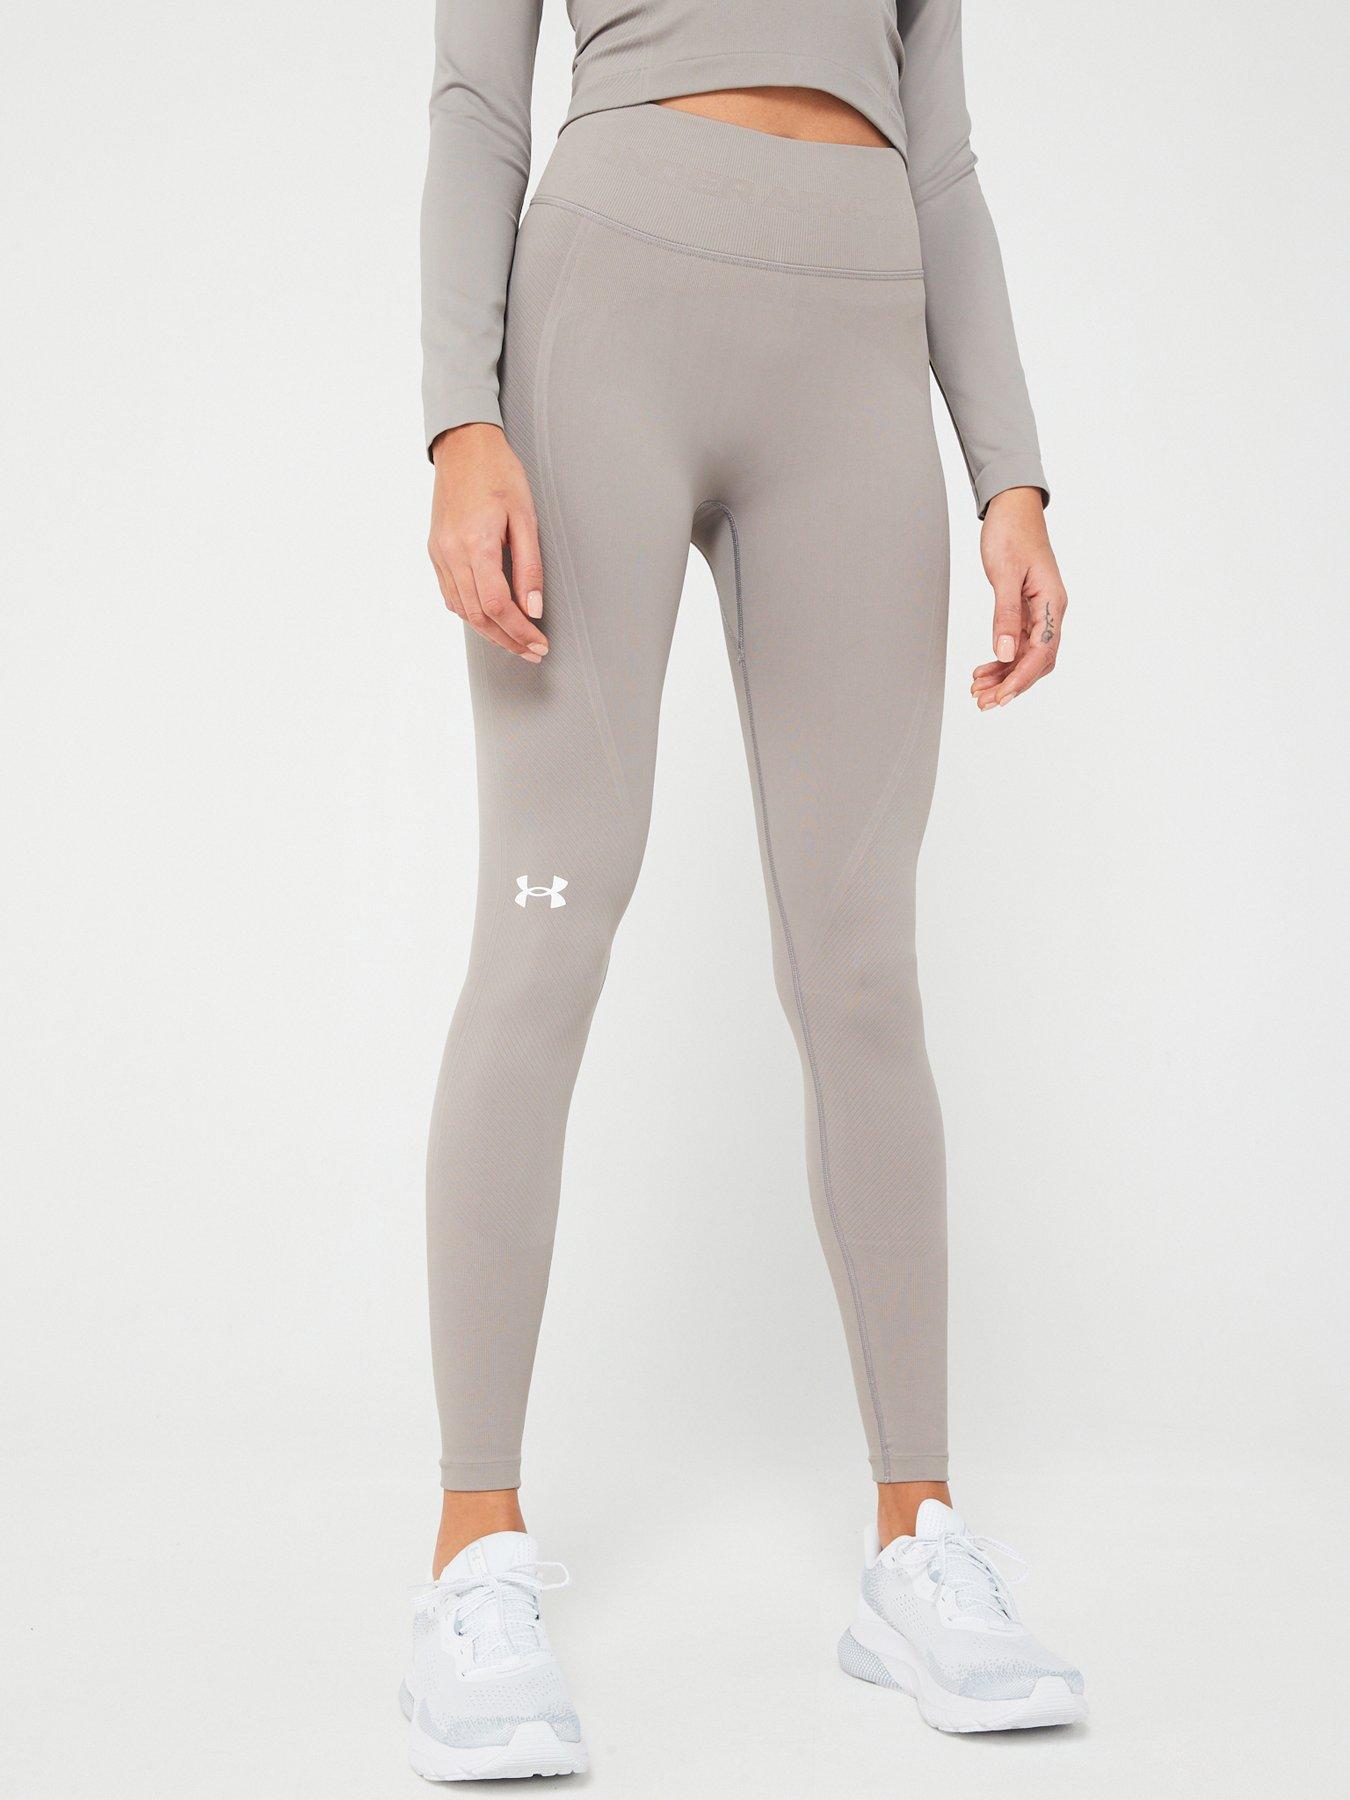 Under armour, Tights & leggings, Womens sports clothing, Sports &  leisure